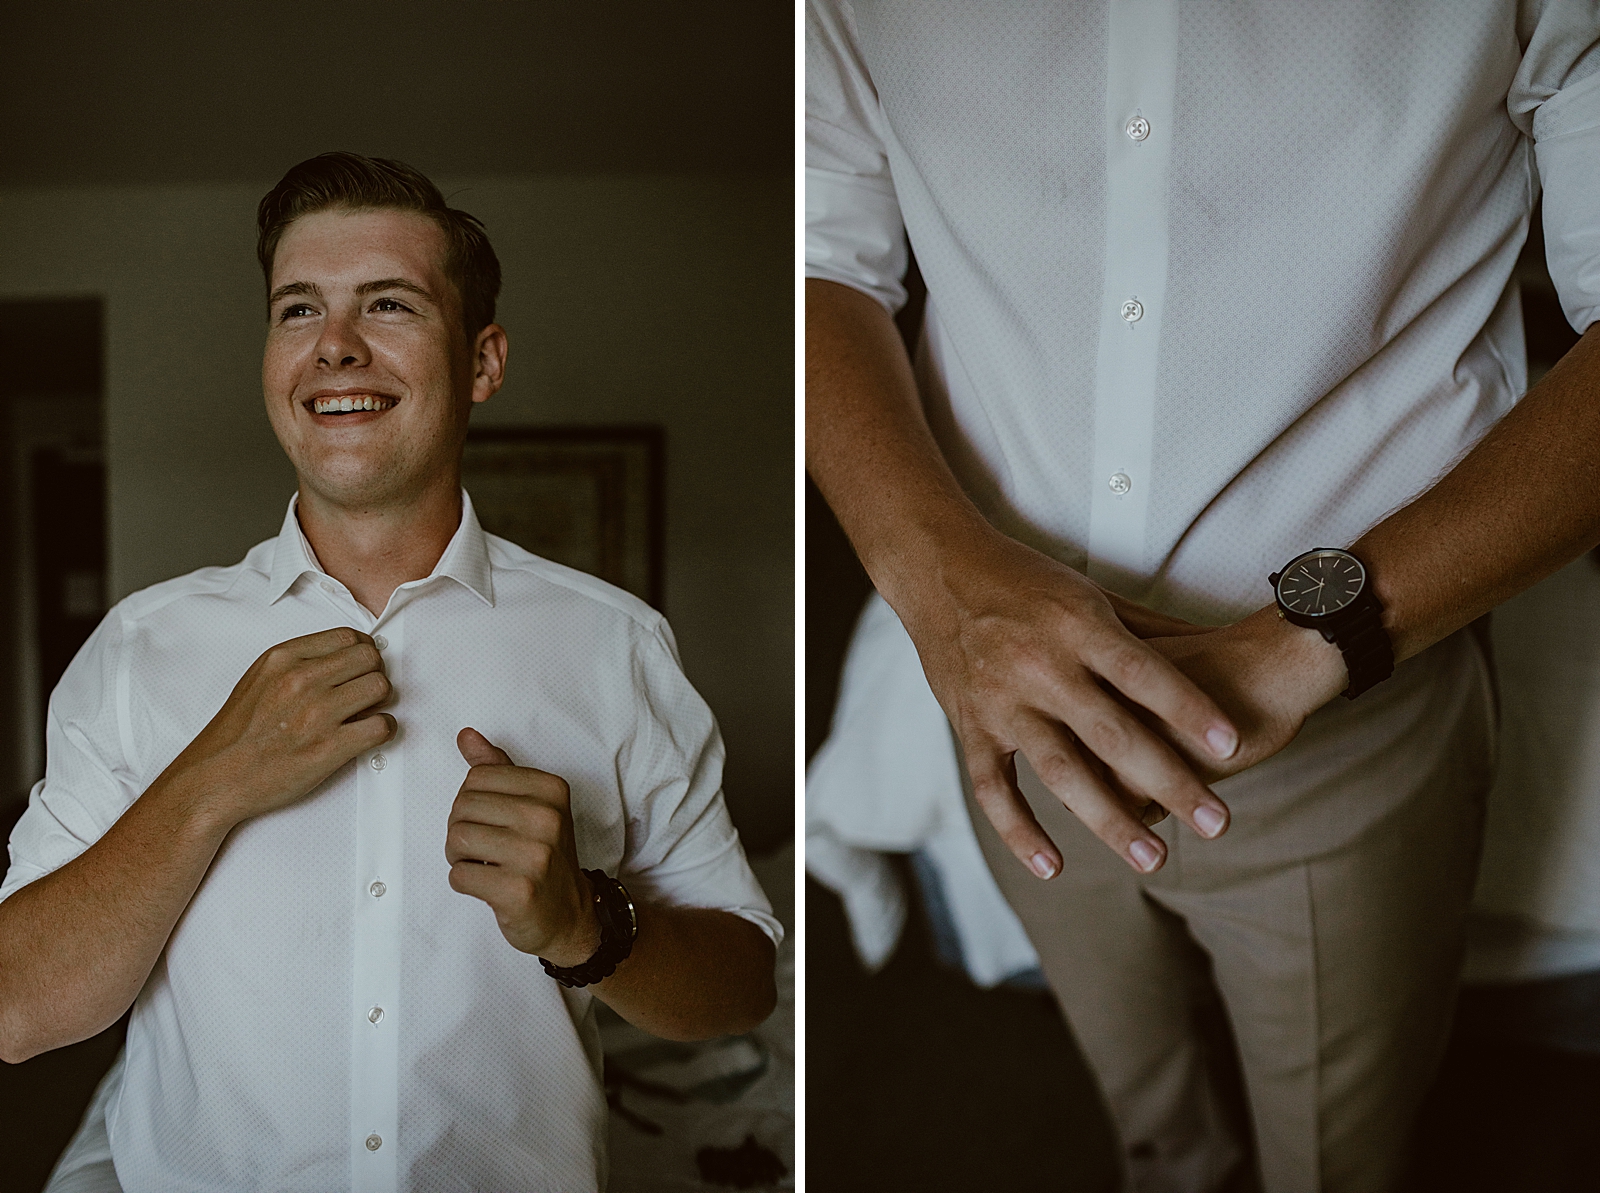 Groom getting ready buttoning shirt